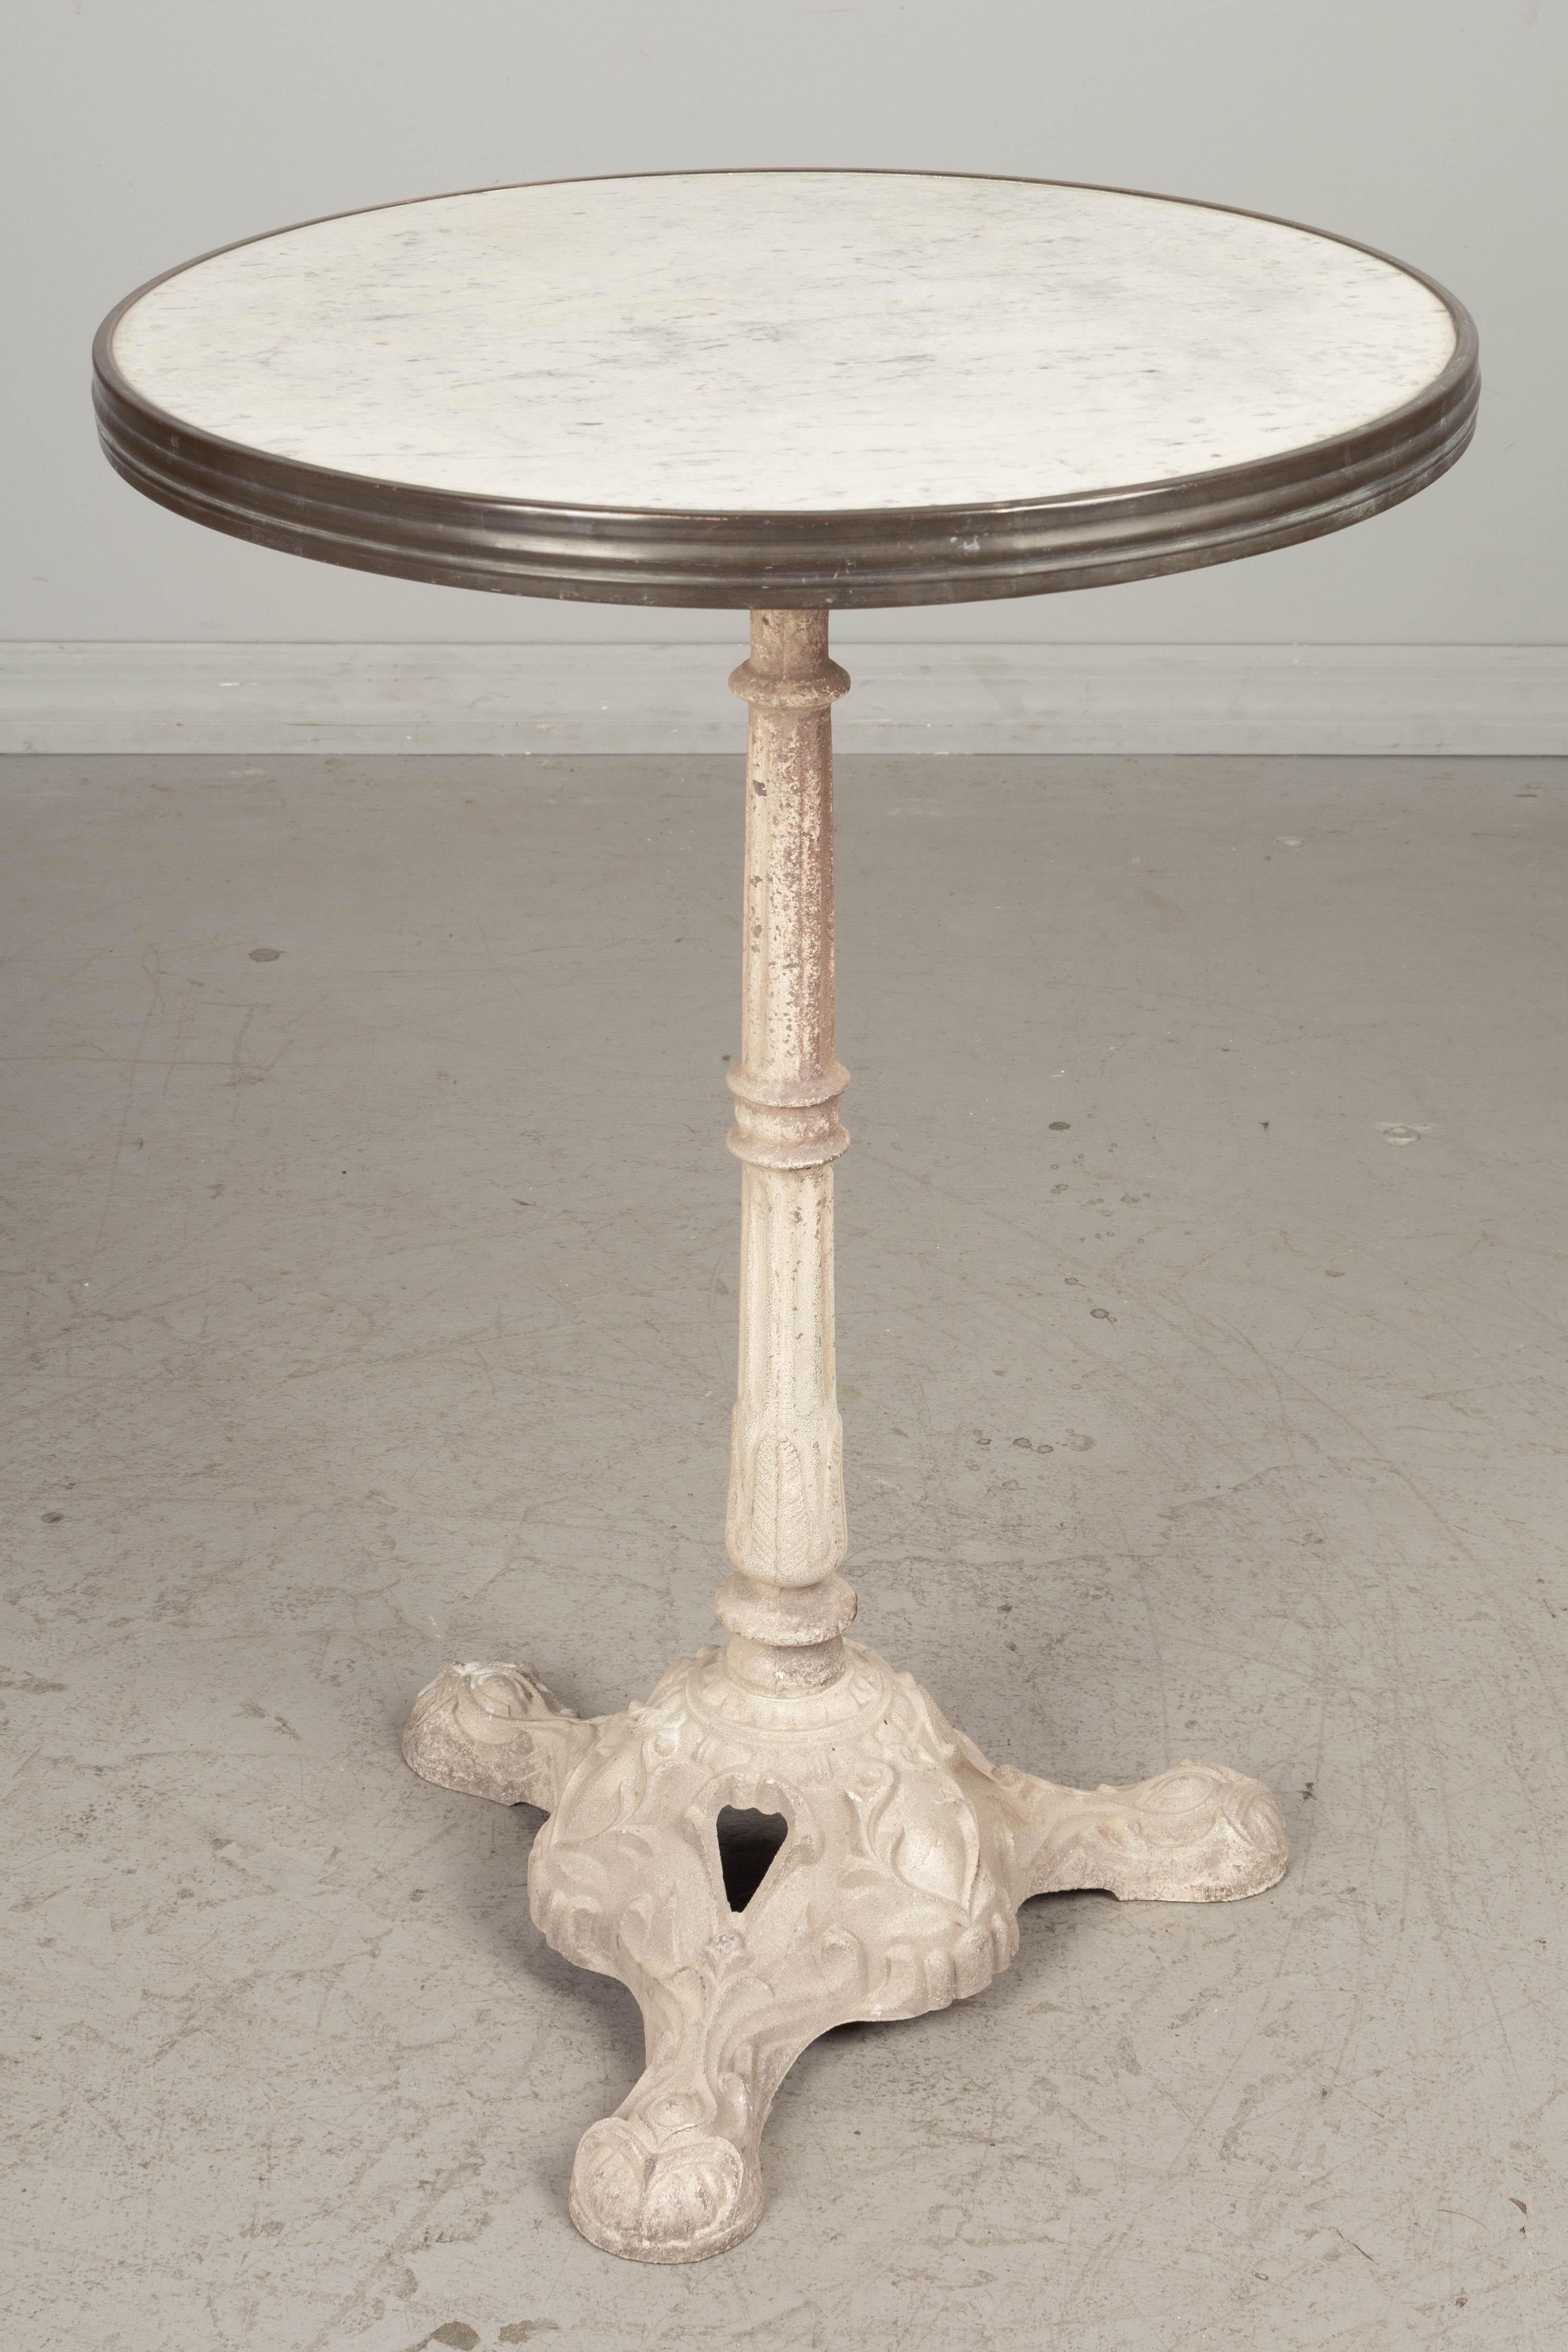 An early 20th century French cast iron bistro table with white painted pedestal base. Original marble top with brass band around the perimeter. Good quality heavy casting. Base was repainted as some point, circa 1900-1920. Dimensions: 28